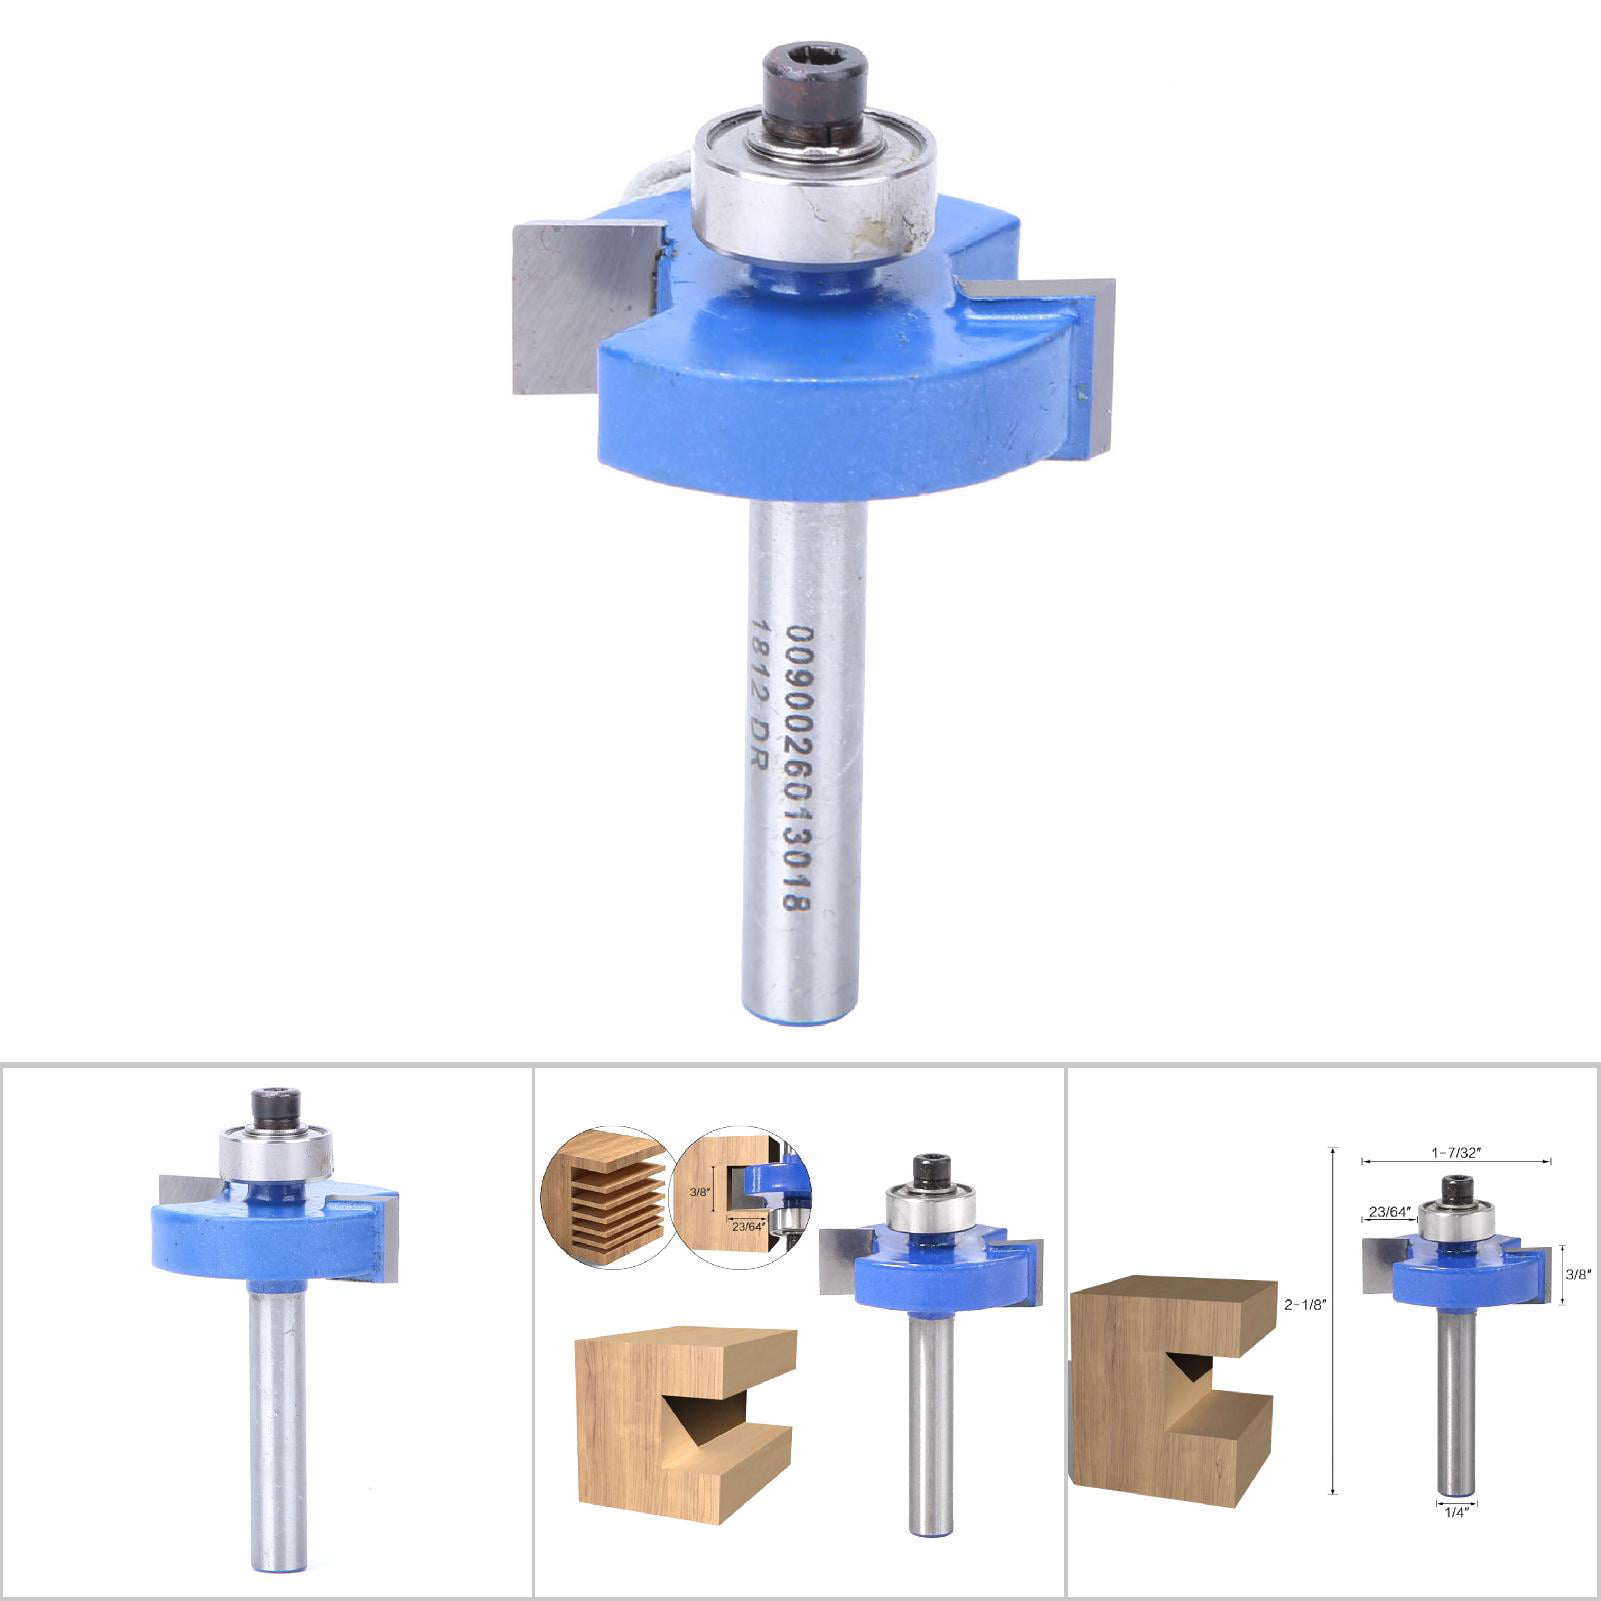 Heat Resistant Router Bit Set for Engraving Trimming Xmas Present Wide Application Practical Durable Router Bit Eight Sides 